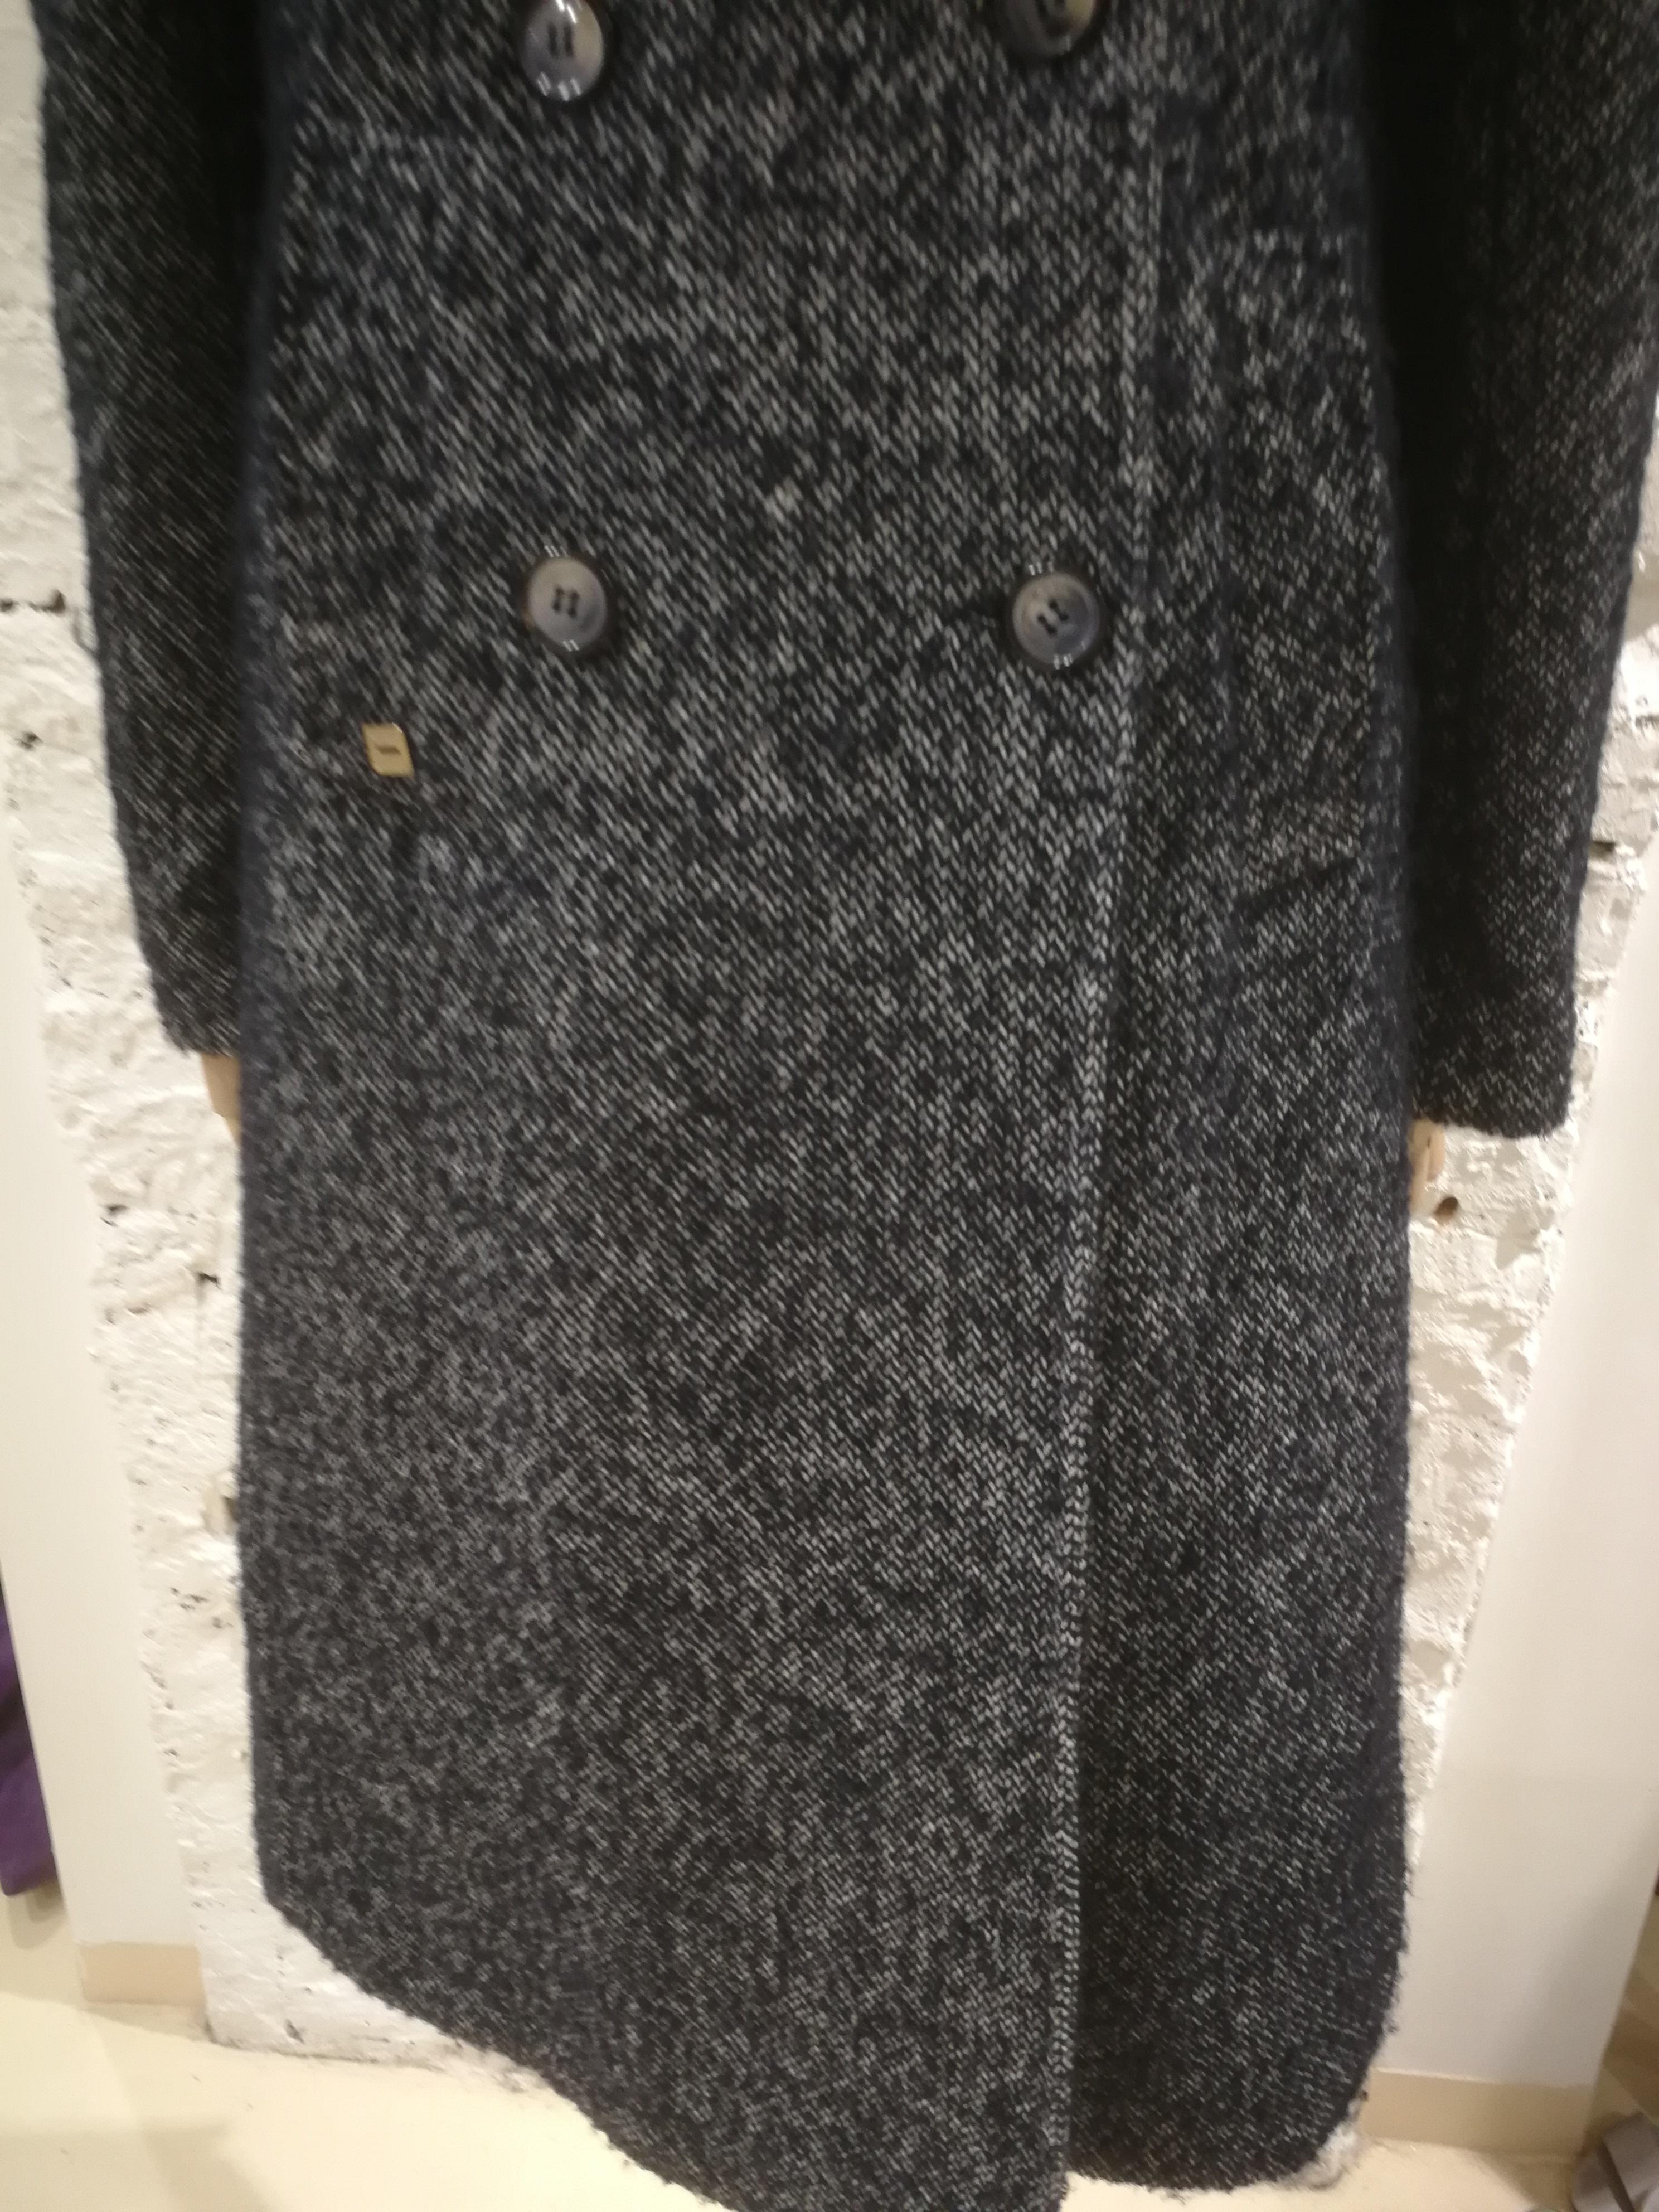 Manila Grace Blue Tweed Coat
totally made in italy in size 42